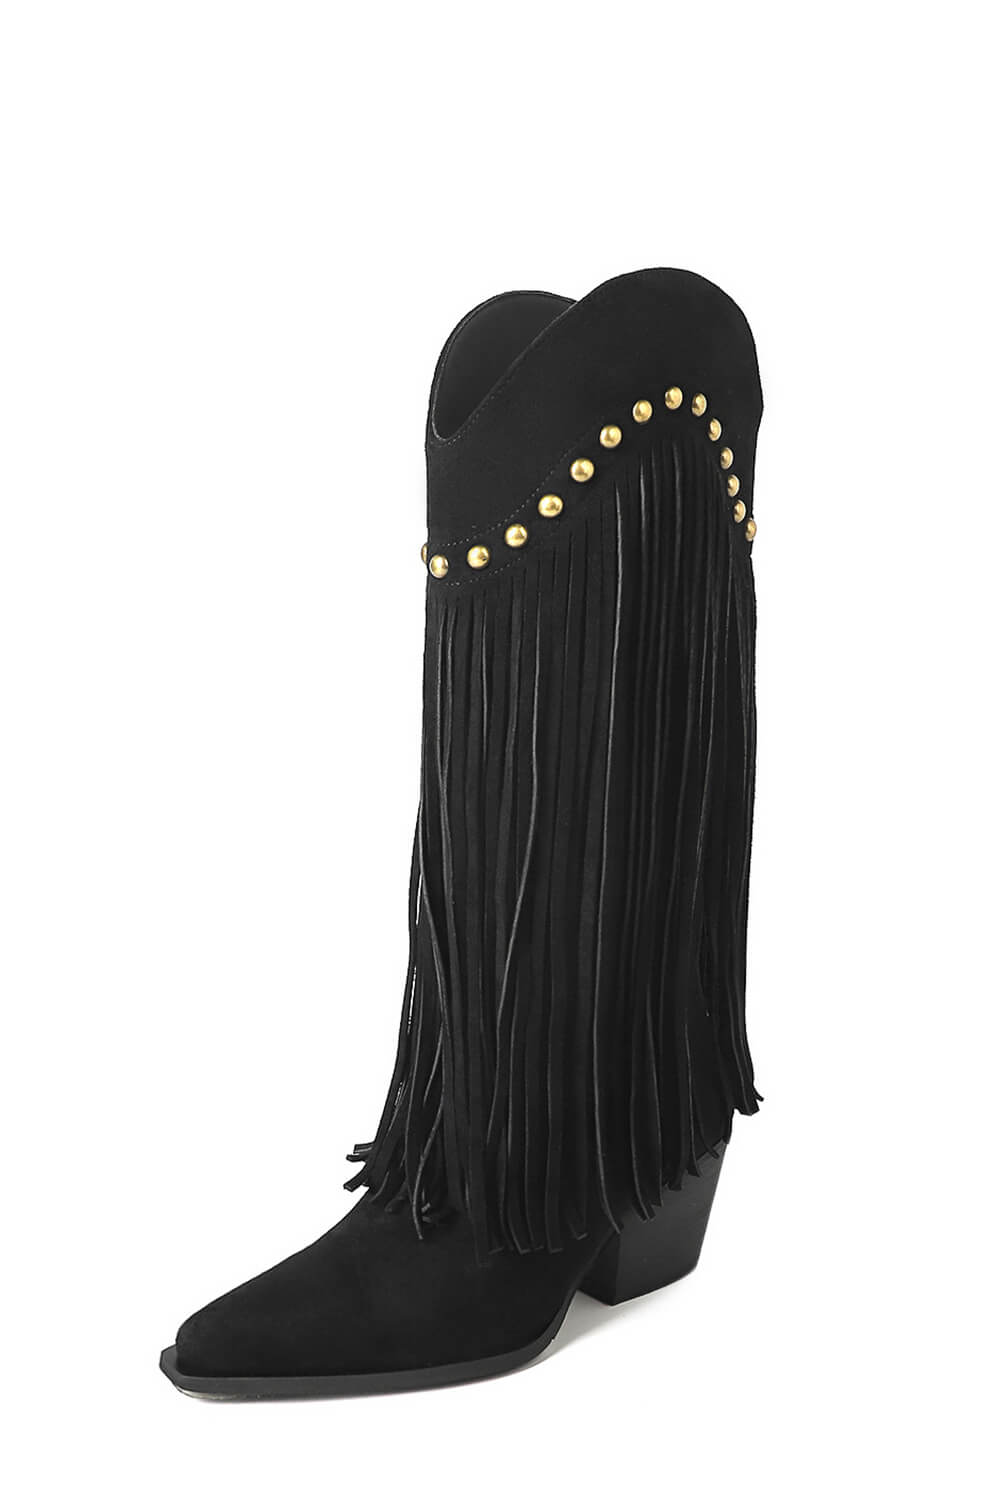 Faux Suede Pointed Toe Fringe Western Cowboy Mid-Calf Block Heeled Boots - Black